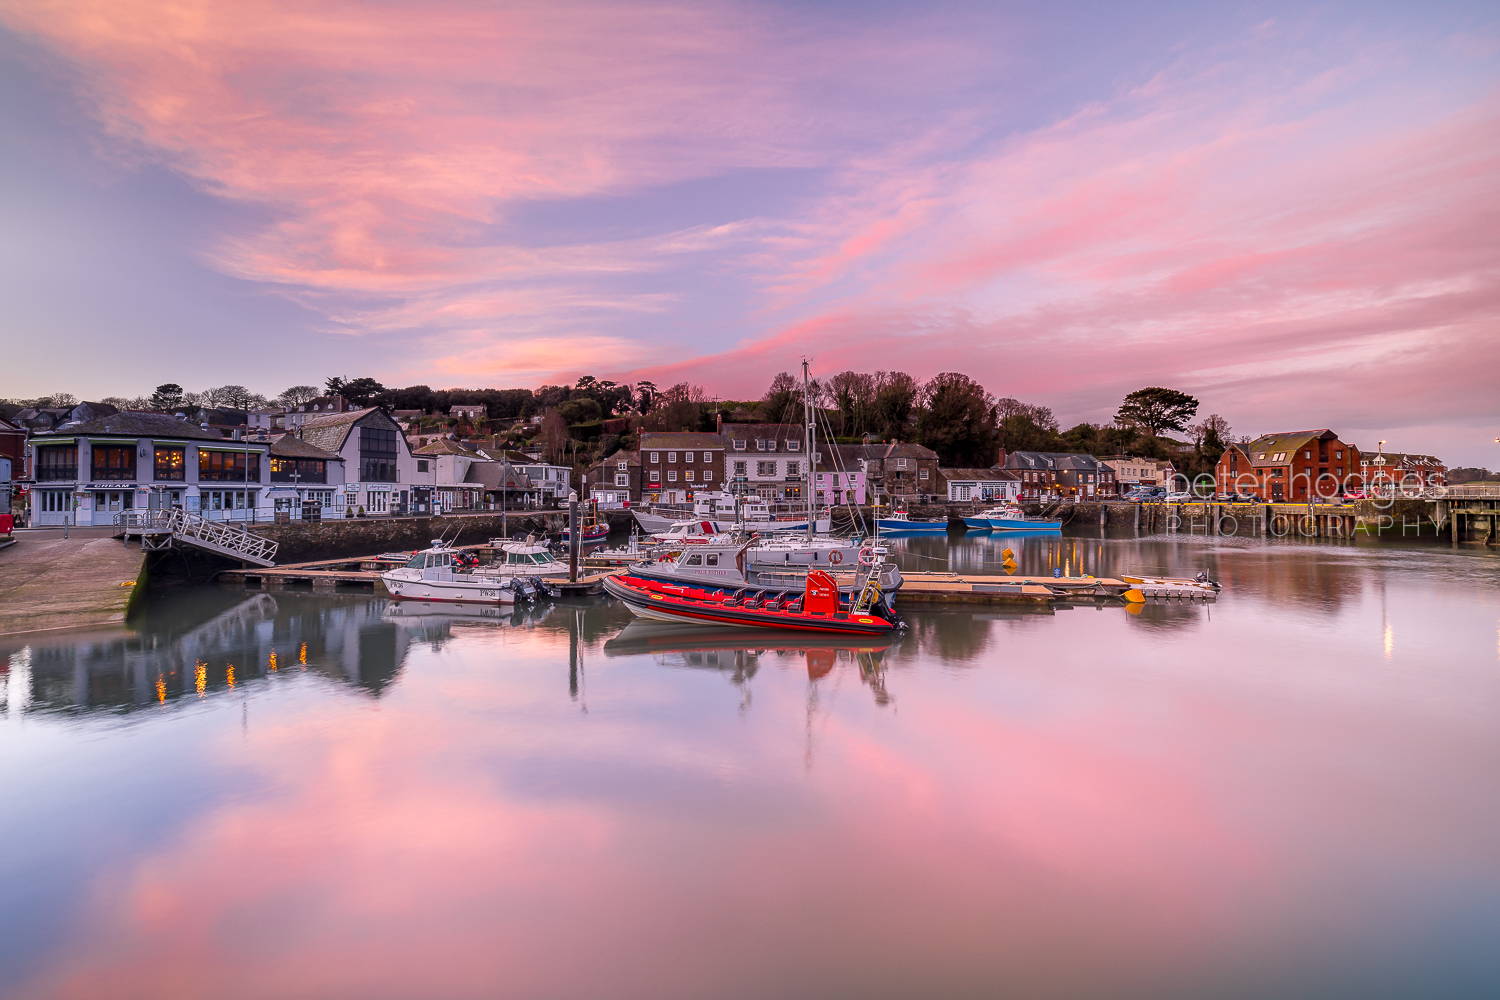 #Padstow #Cornish Harbours # Sunsets #sunsets #Cornish Sunsets #padstow sunset